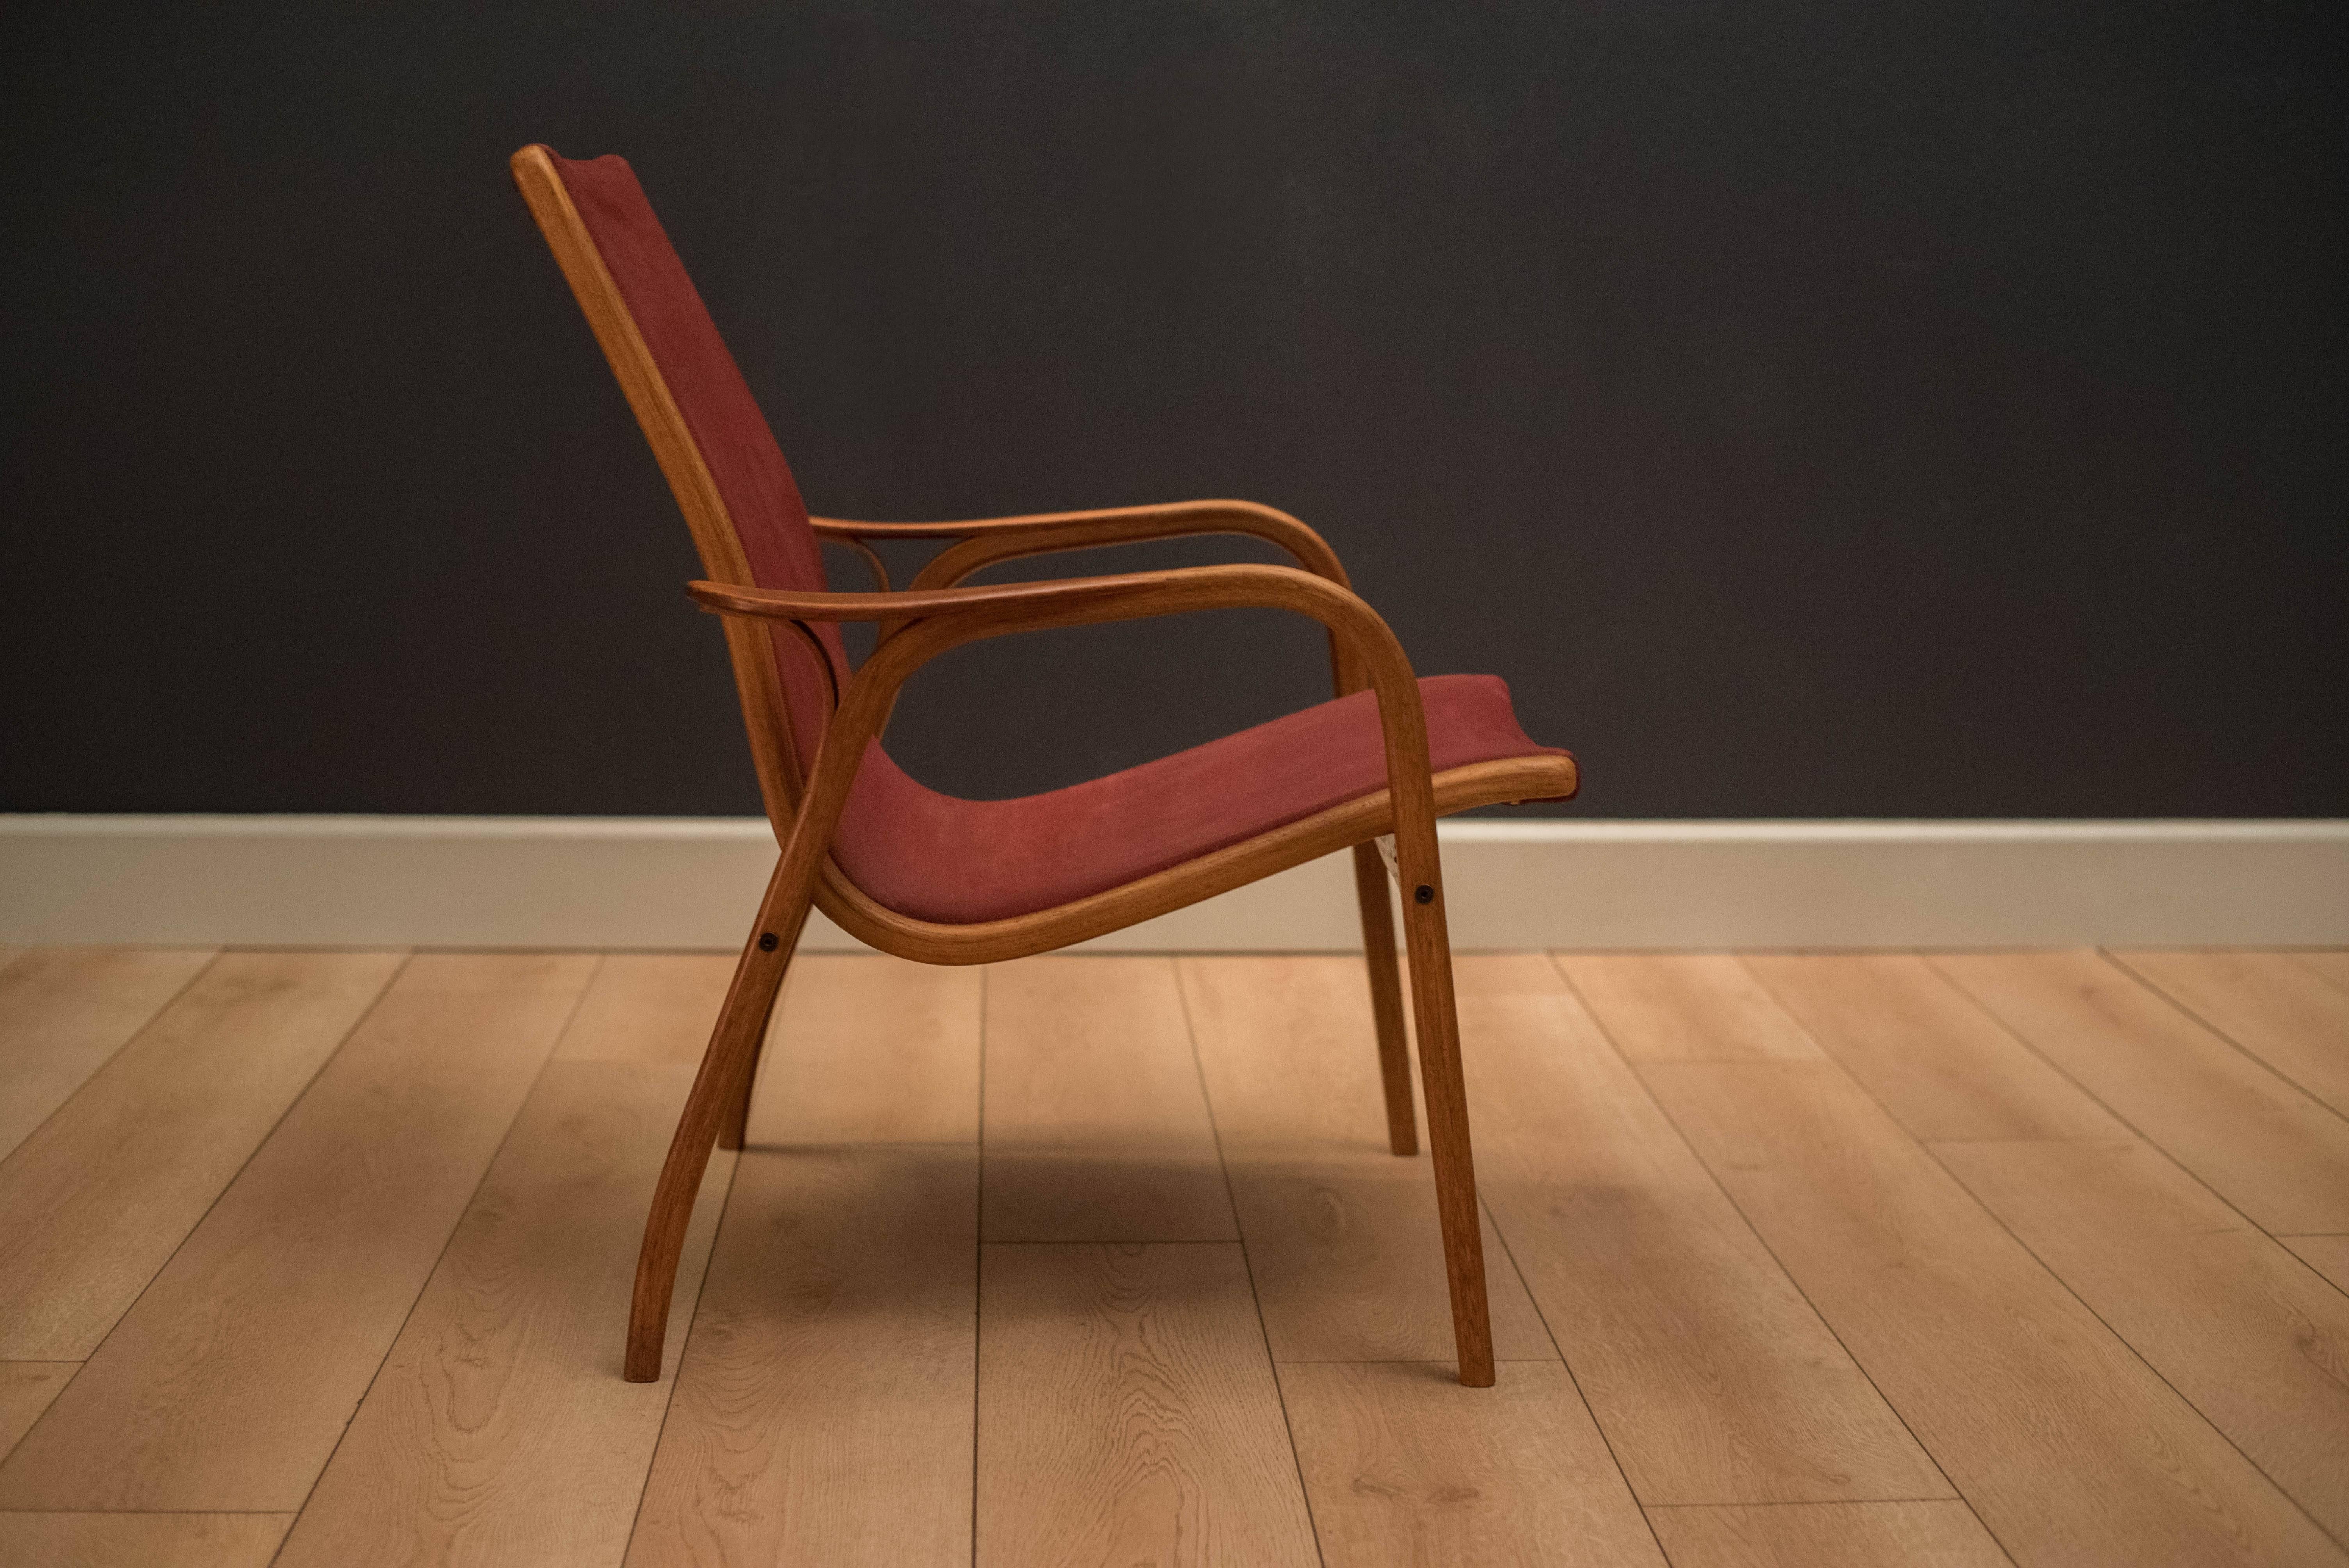 Mid century low back Laminett lounge chair designed by Yngve Ekström for Swedese. This piece displays a sculptural oak frame with contrasting teak arms. Retains the original suede fabric in burgundy red.